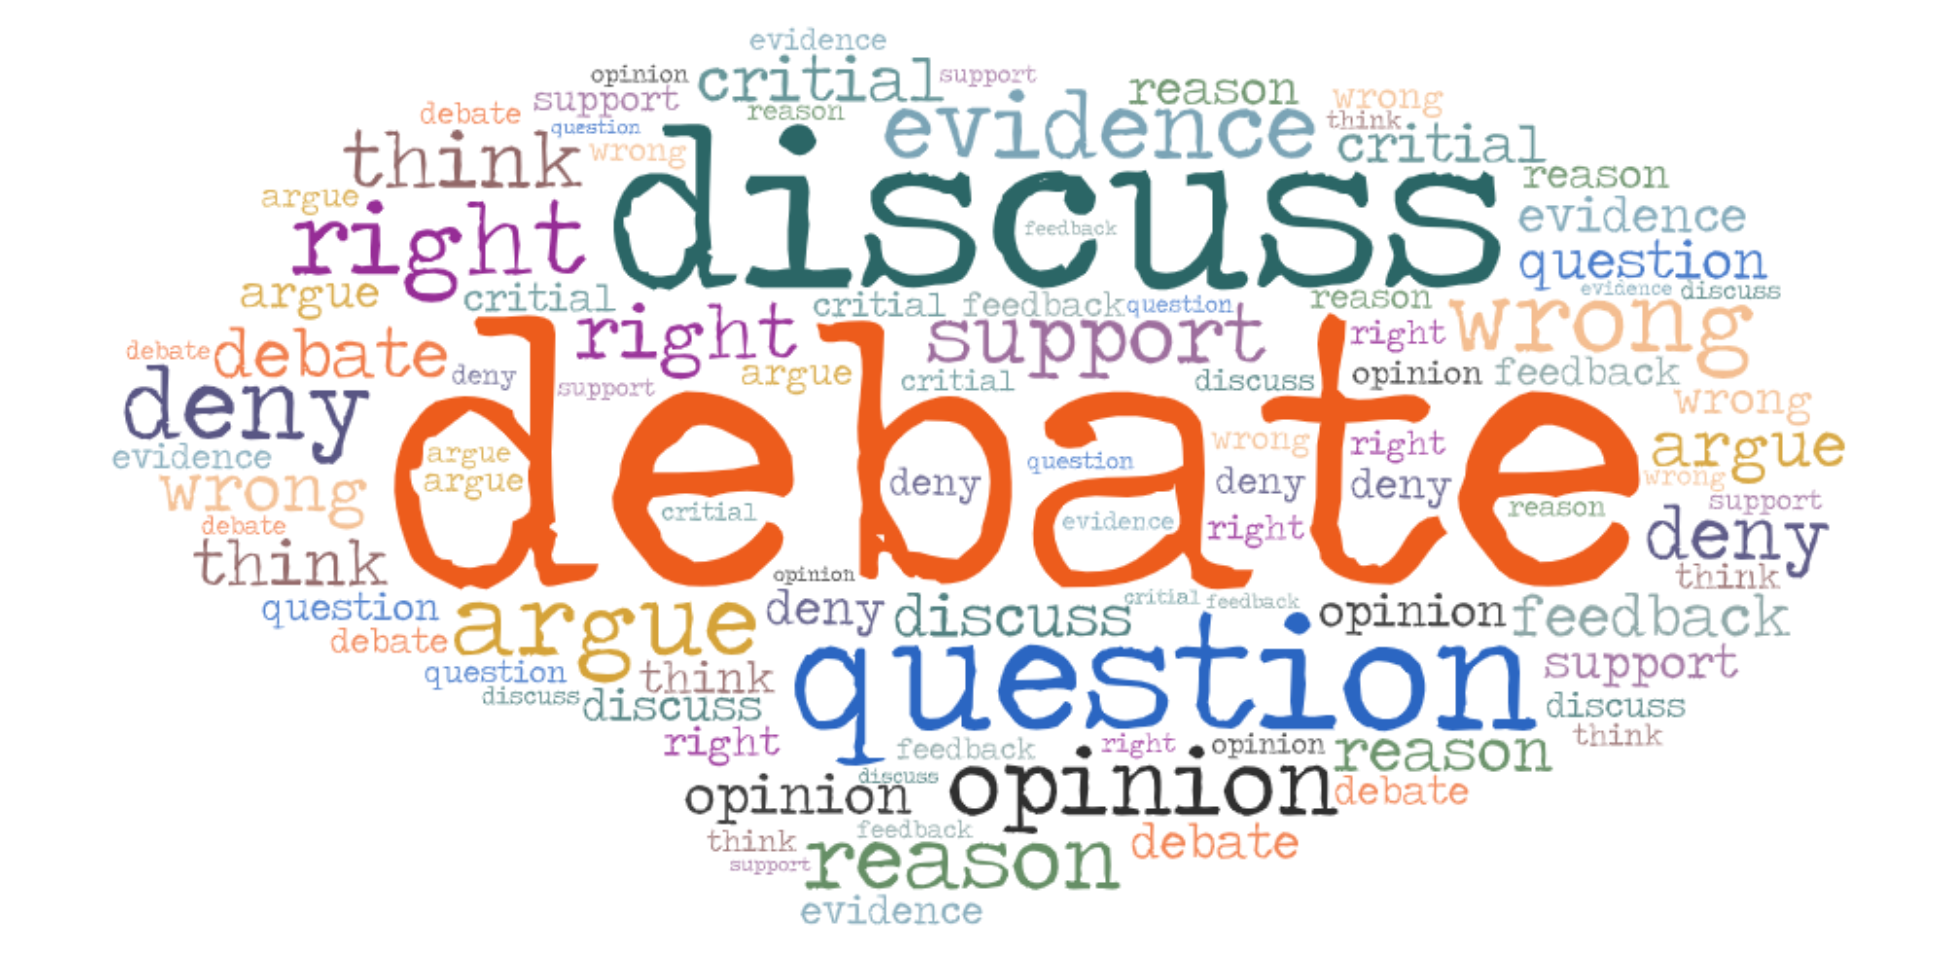 debating-the-issues-with-kialo-etec523-mobile-and-open-learning